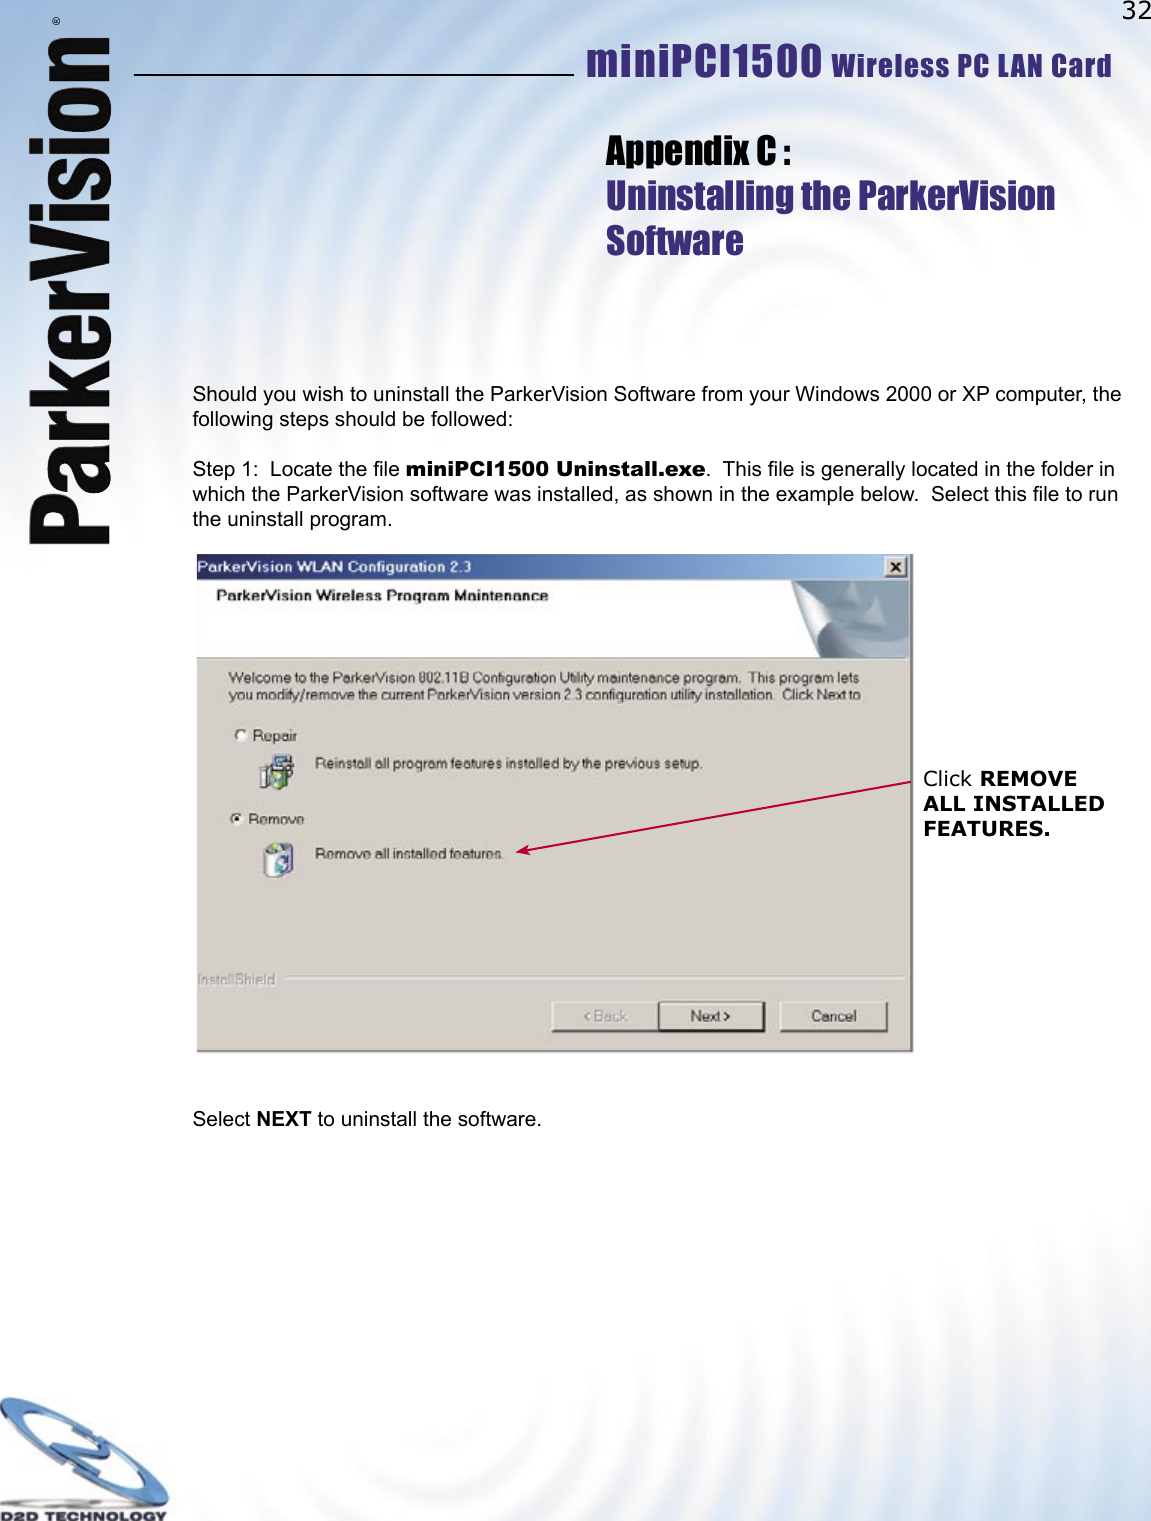 32miniPCI1500 Wireless PC LAN Card ®Should you wish to uninstall the ParkerVision Software from your Windows 2000 or XP computer, the following steps should be followed:Step 1:  Locate the ﬁ le miniPCI1500 Uninstall.exe.  This ﬁ le is generally located in the folder in which the ParkerVision software was installed, as shown in the example below.  Select this ﬁ le to run the uninstall program.                                      Select NEXT to uninstall the software.Appendix C :Uninstalling the ParkerVisionSoftwareClick REMOVE ALL INSTALLED FEATURES.   